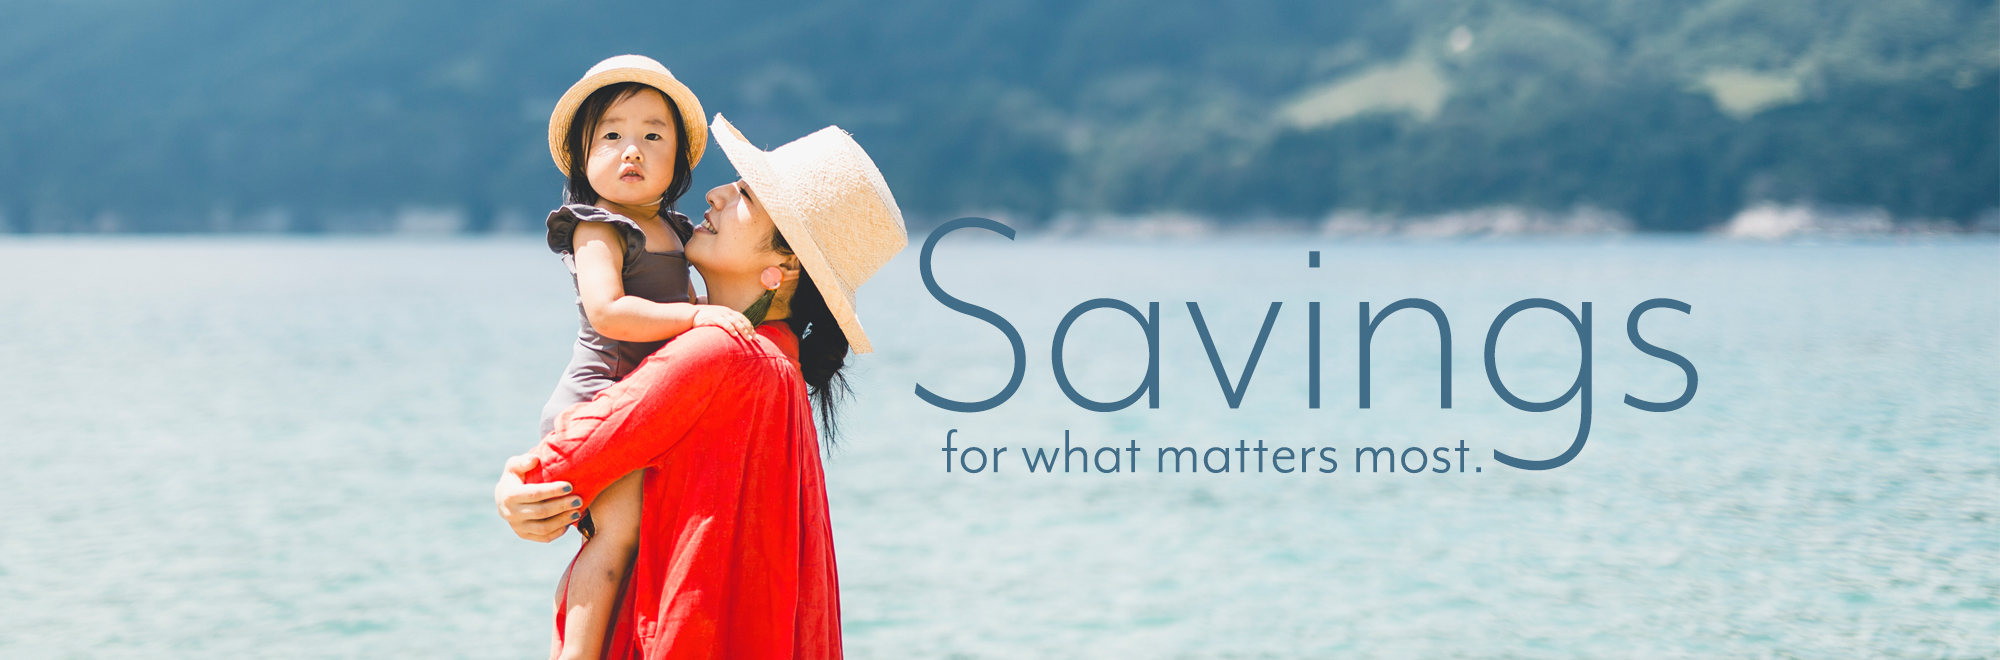 Savings for what matters most